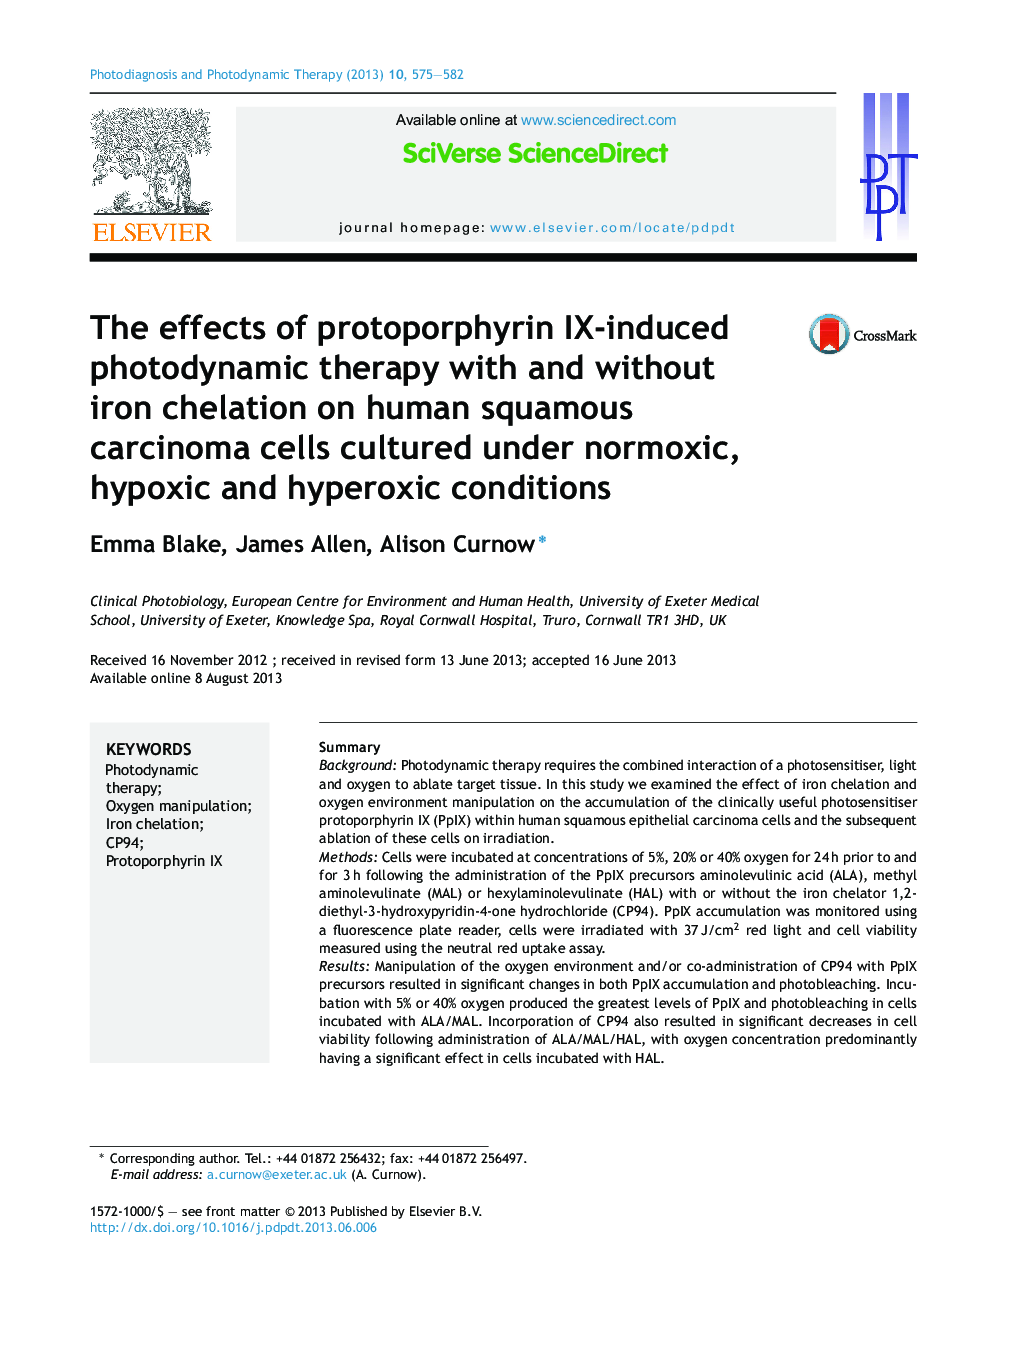 The effects of protoporphyrin IX-induced photodynamic therapy with and without iron chelation on human squamous carcinoma cells cultured under normoxic, hypoxic and hyperoxic conditions